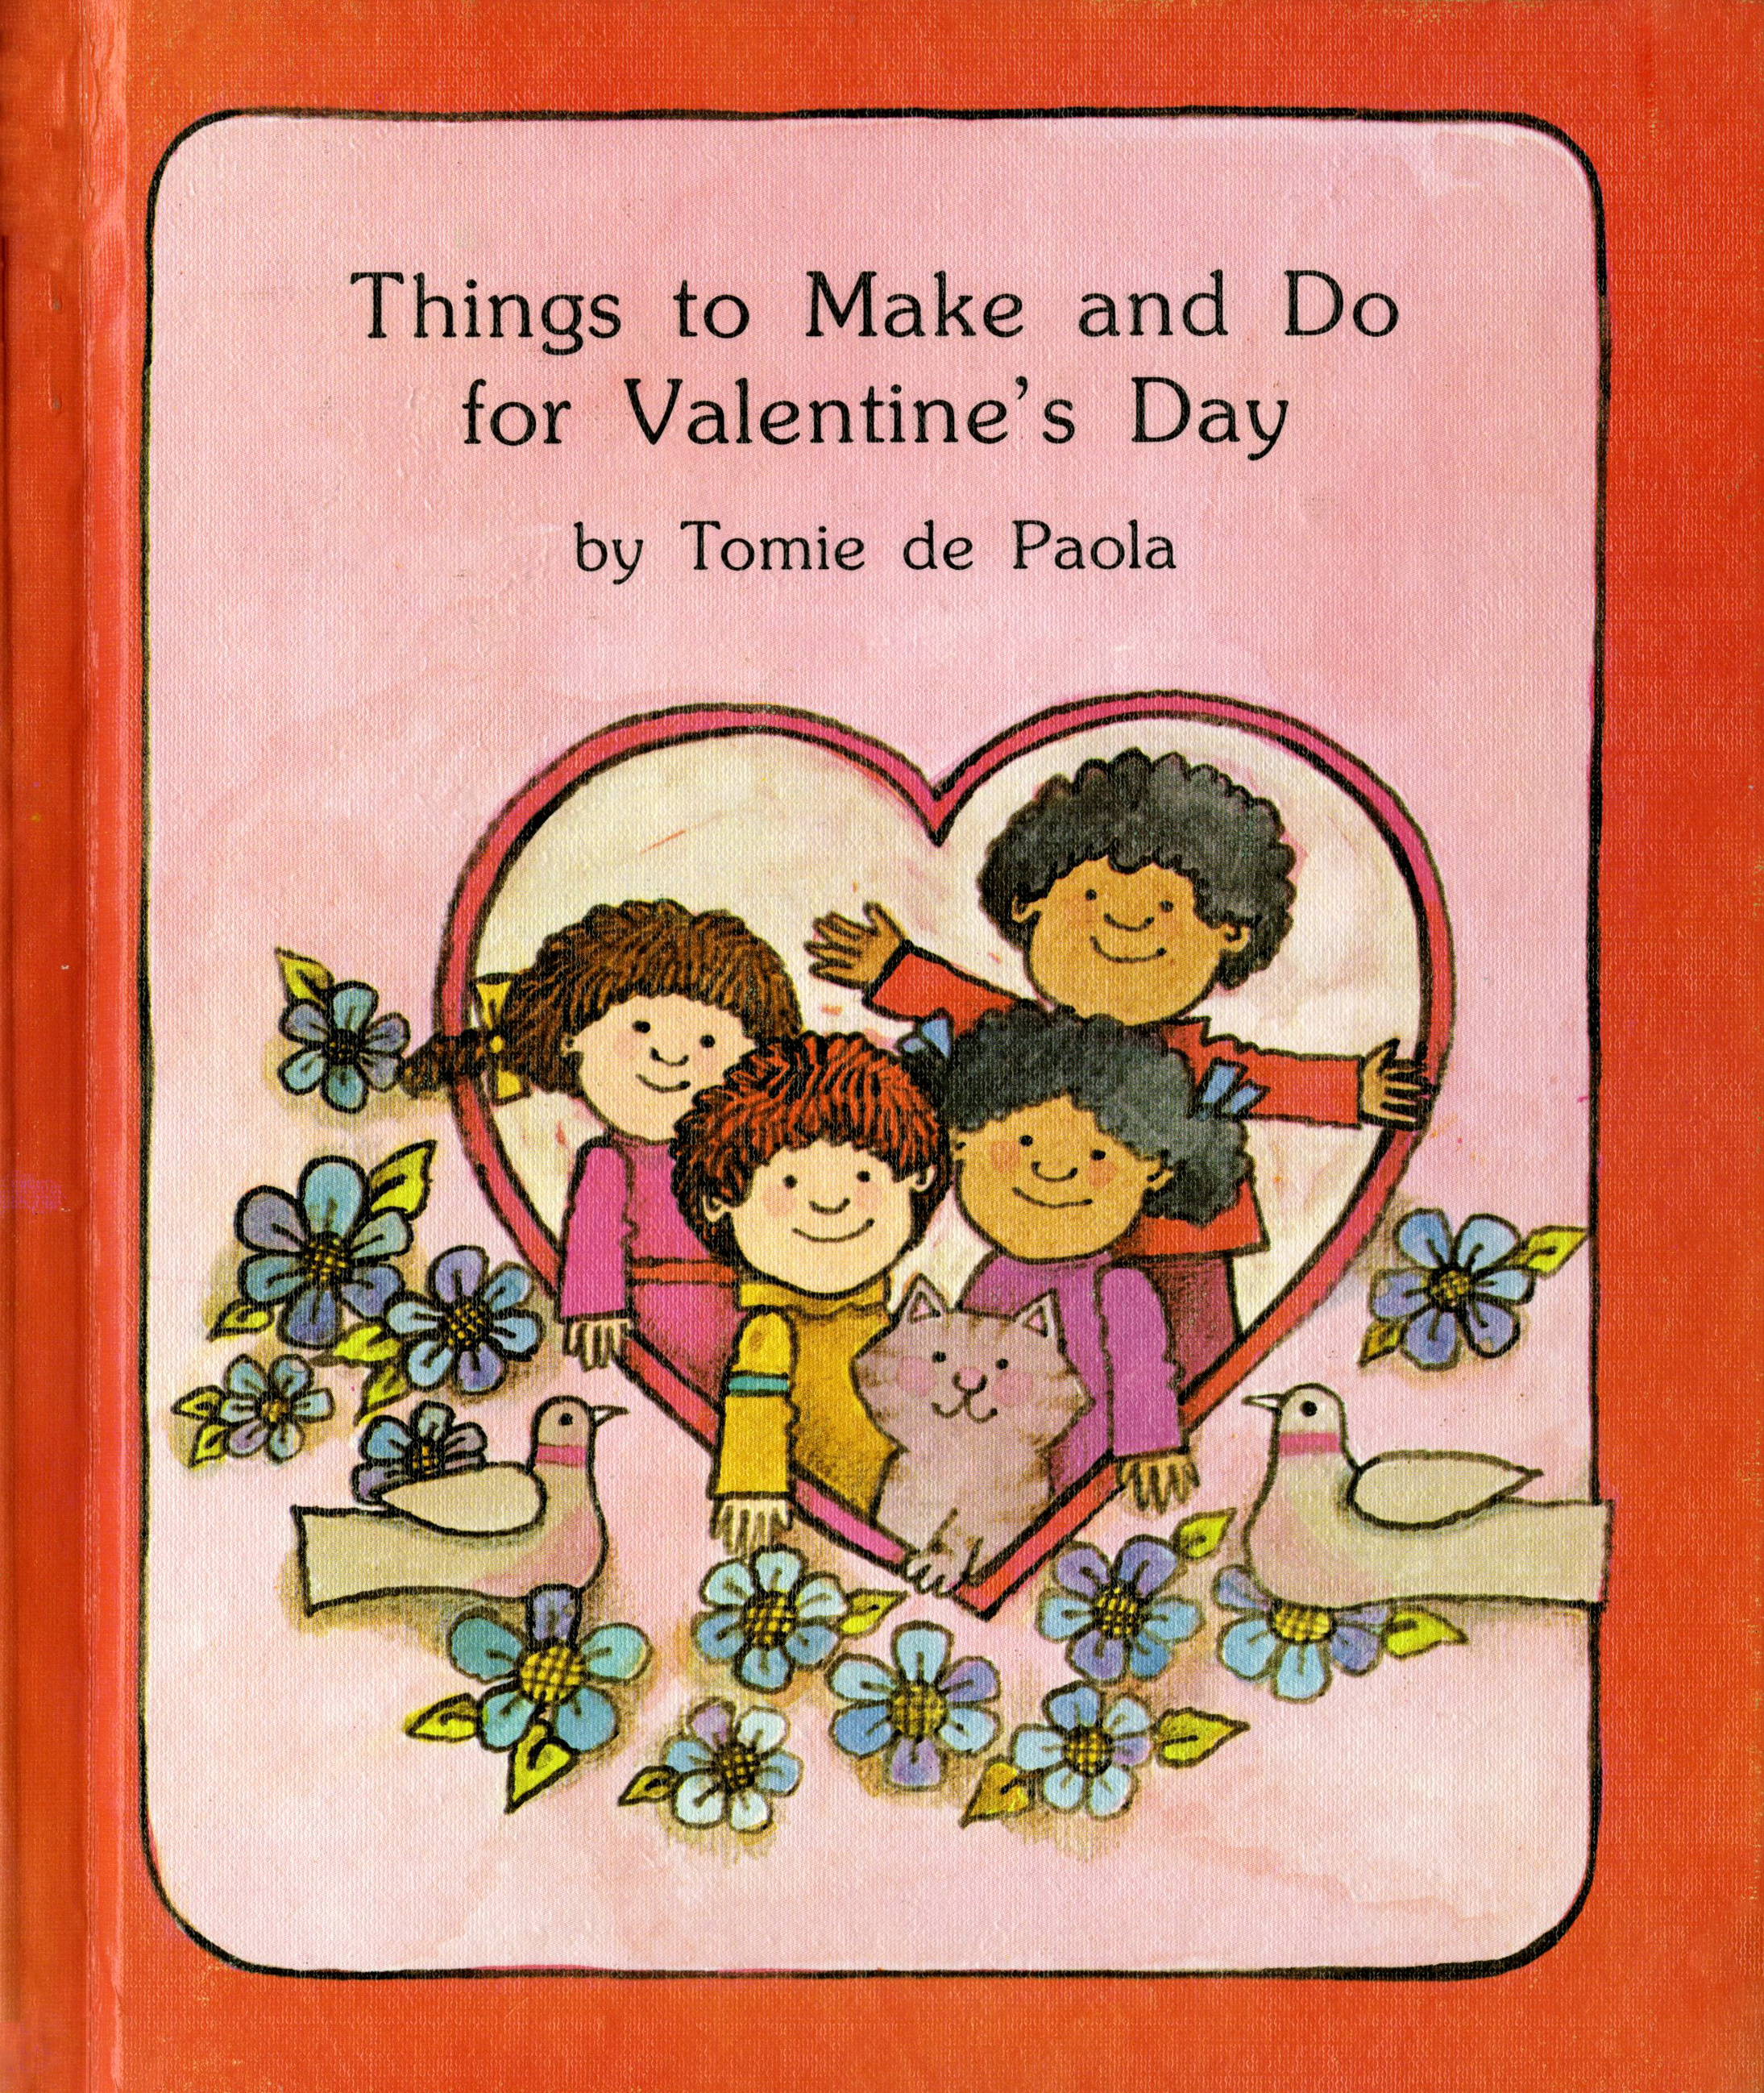 Things to Make and Do for Valentine's Day Cover.jpg